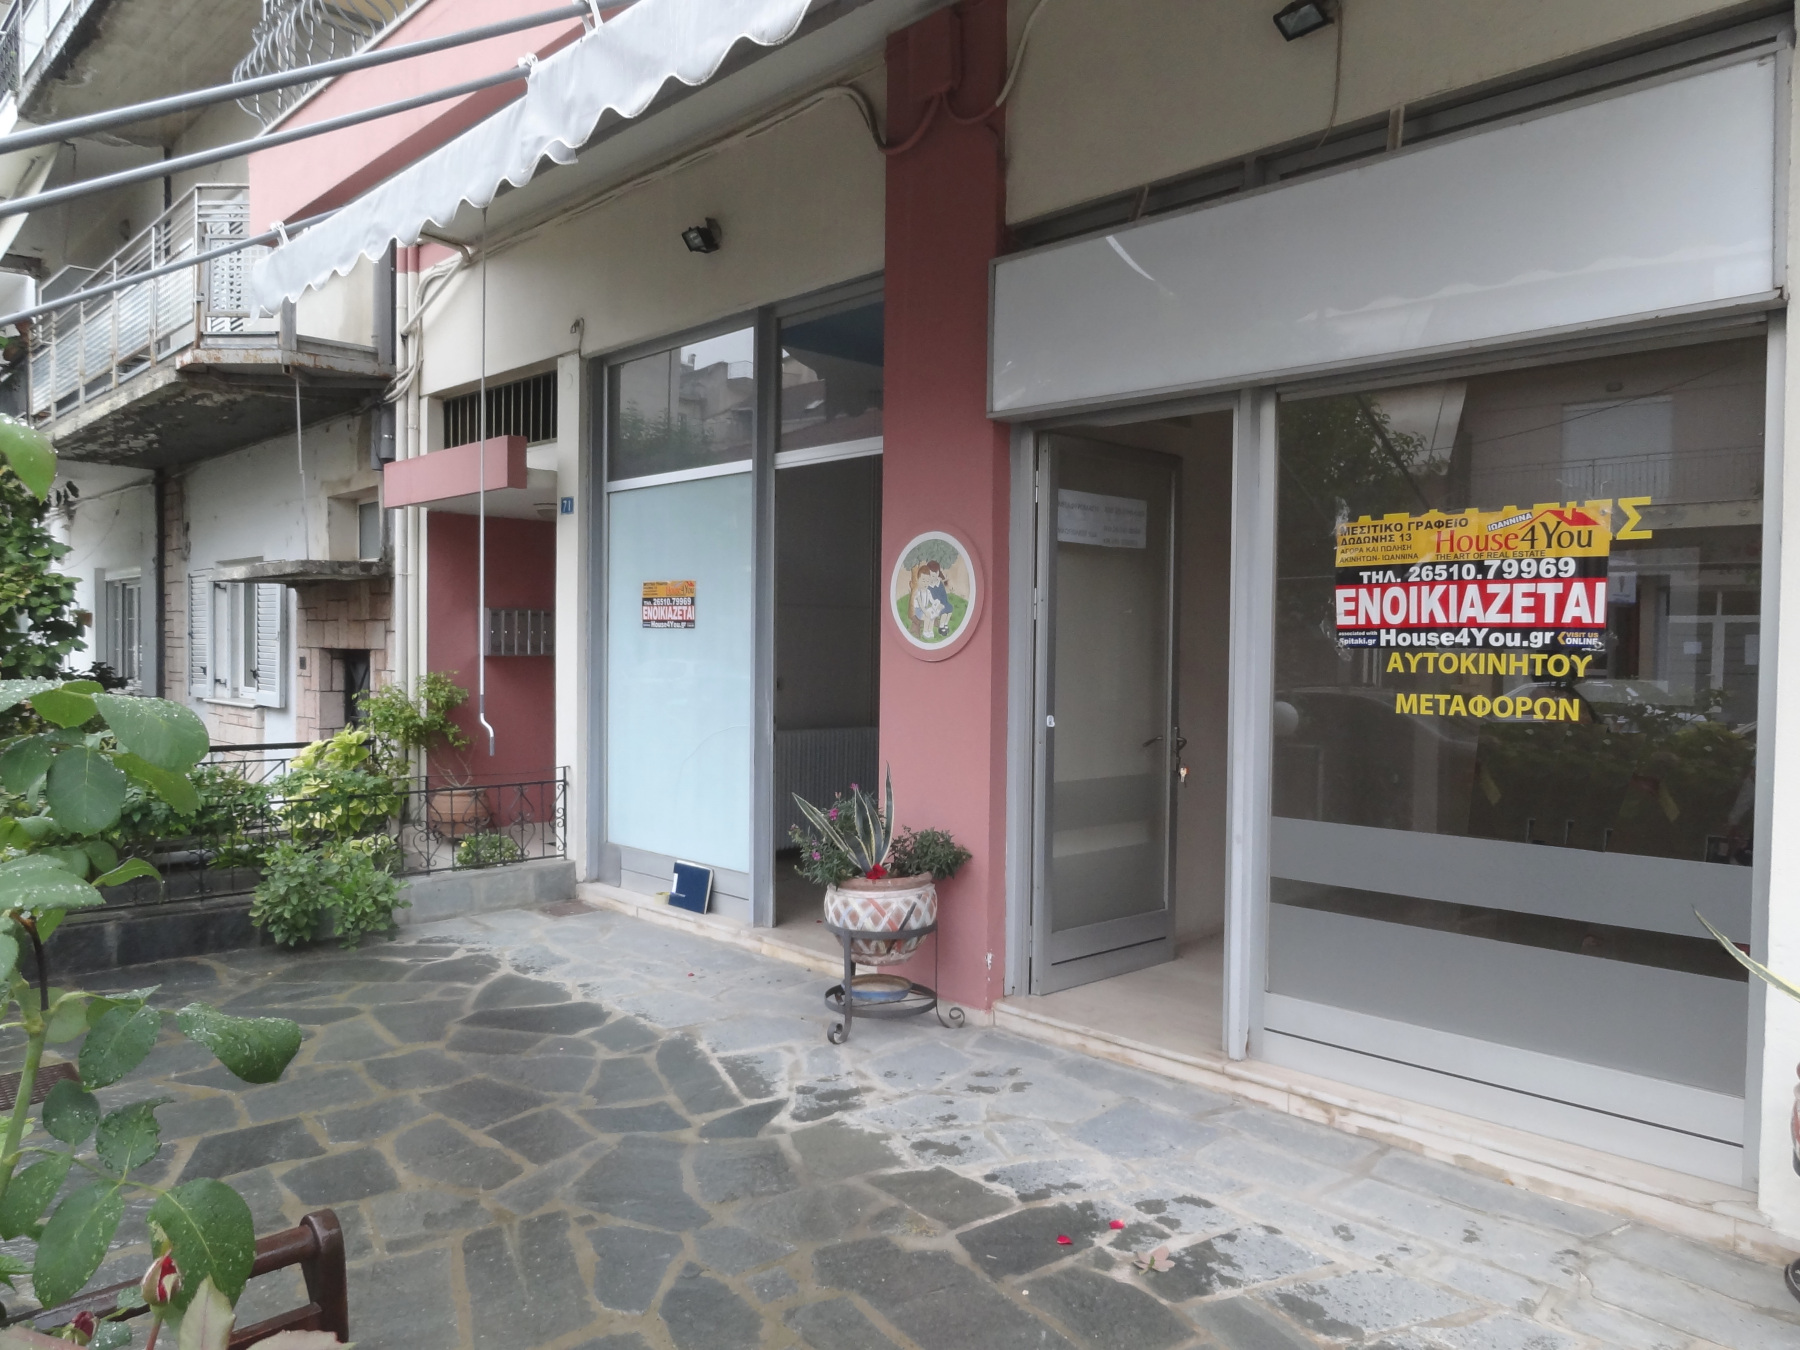 Ground floor commercial space for rent, 40 sq.m. on Christou Katsari 71 in Ioannina